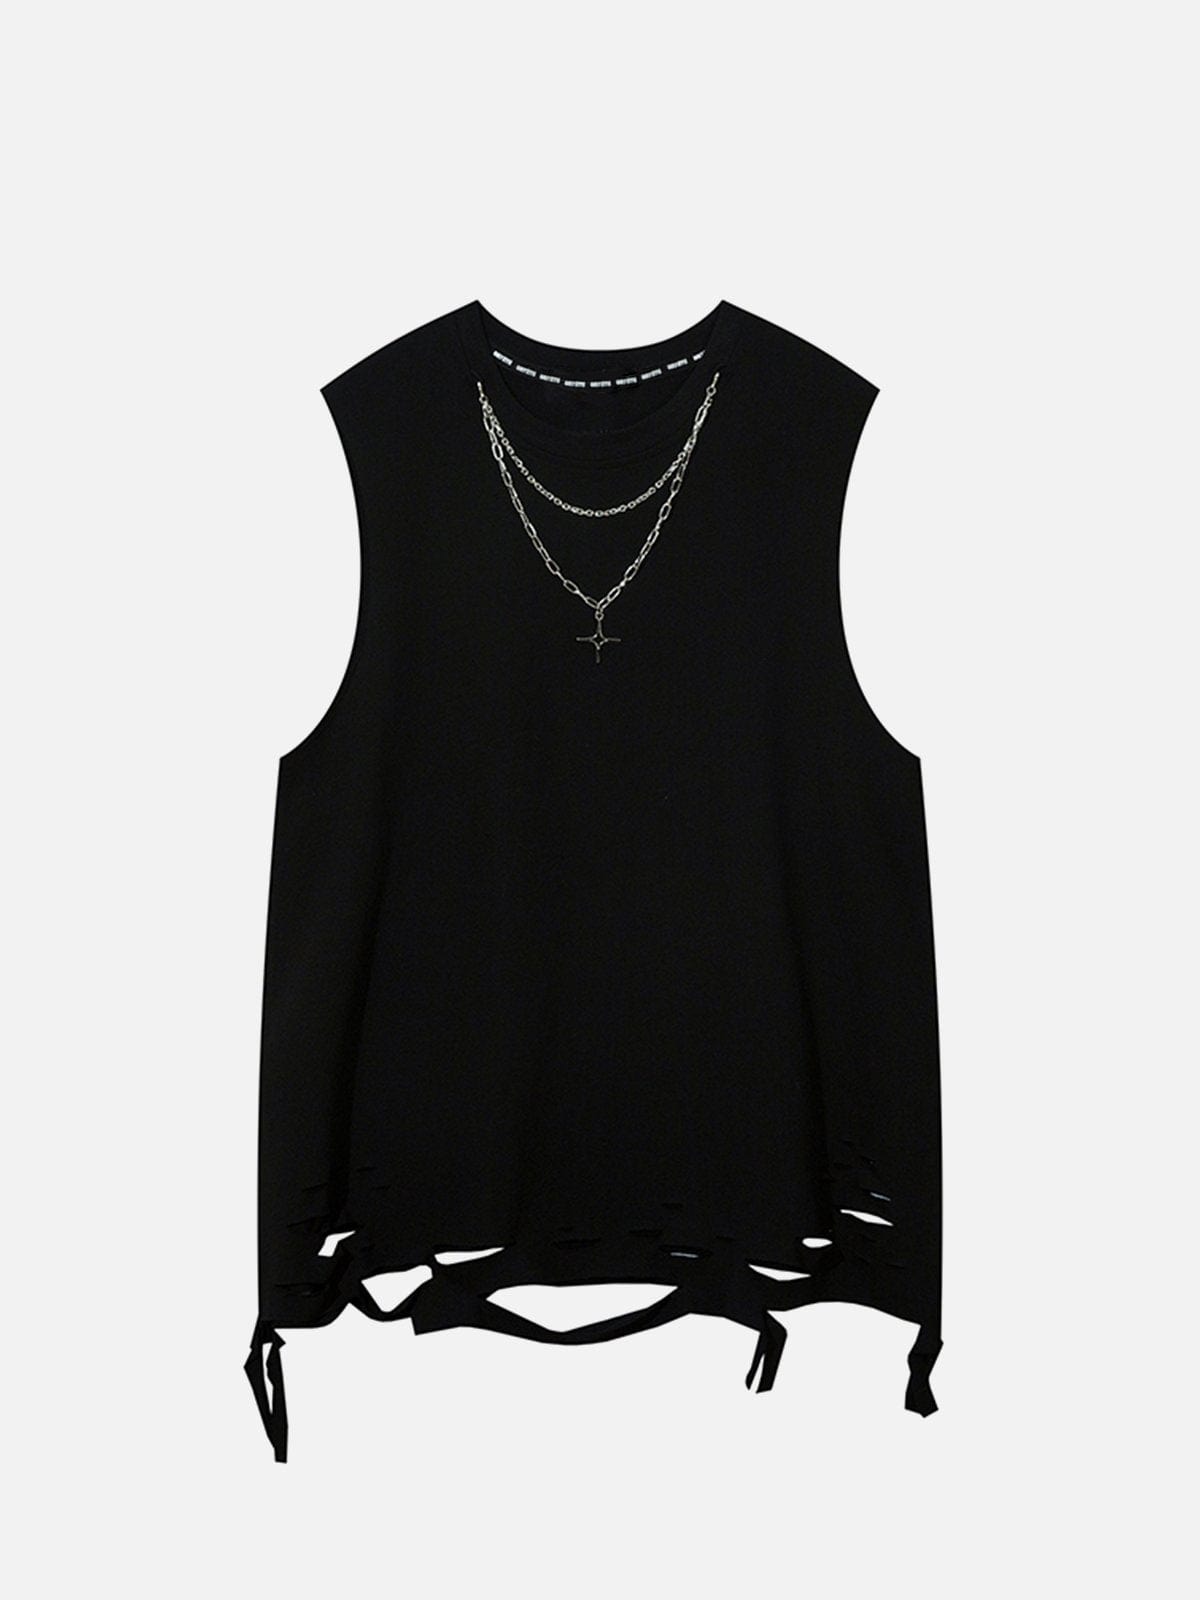 NEV Chain Solid Color Ripped Vest